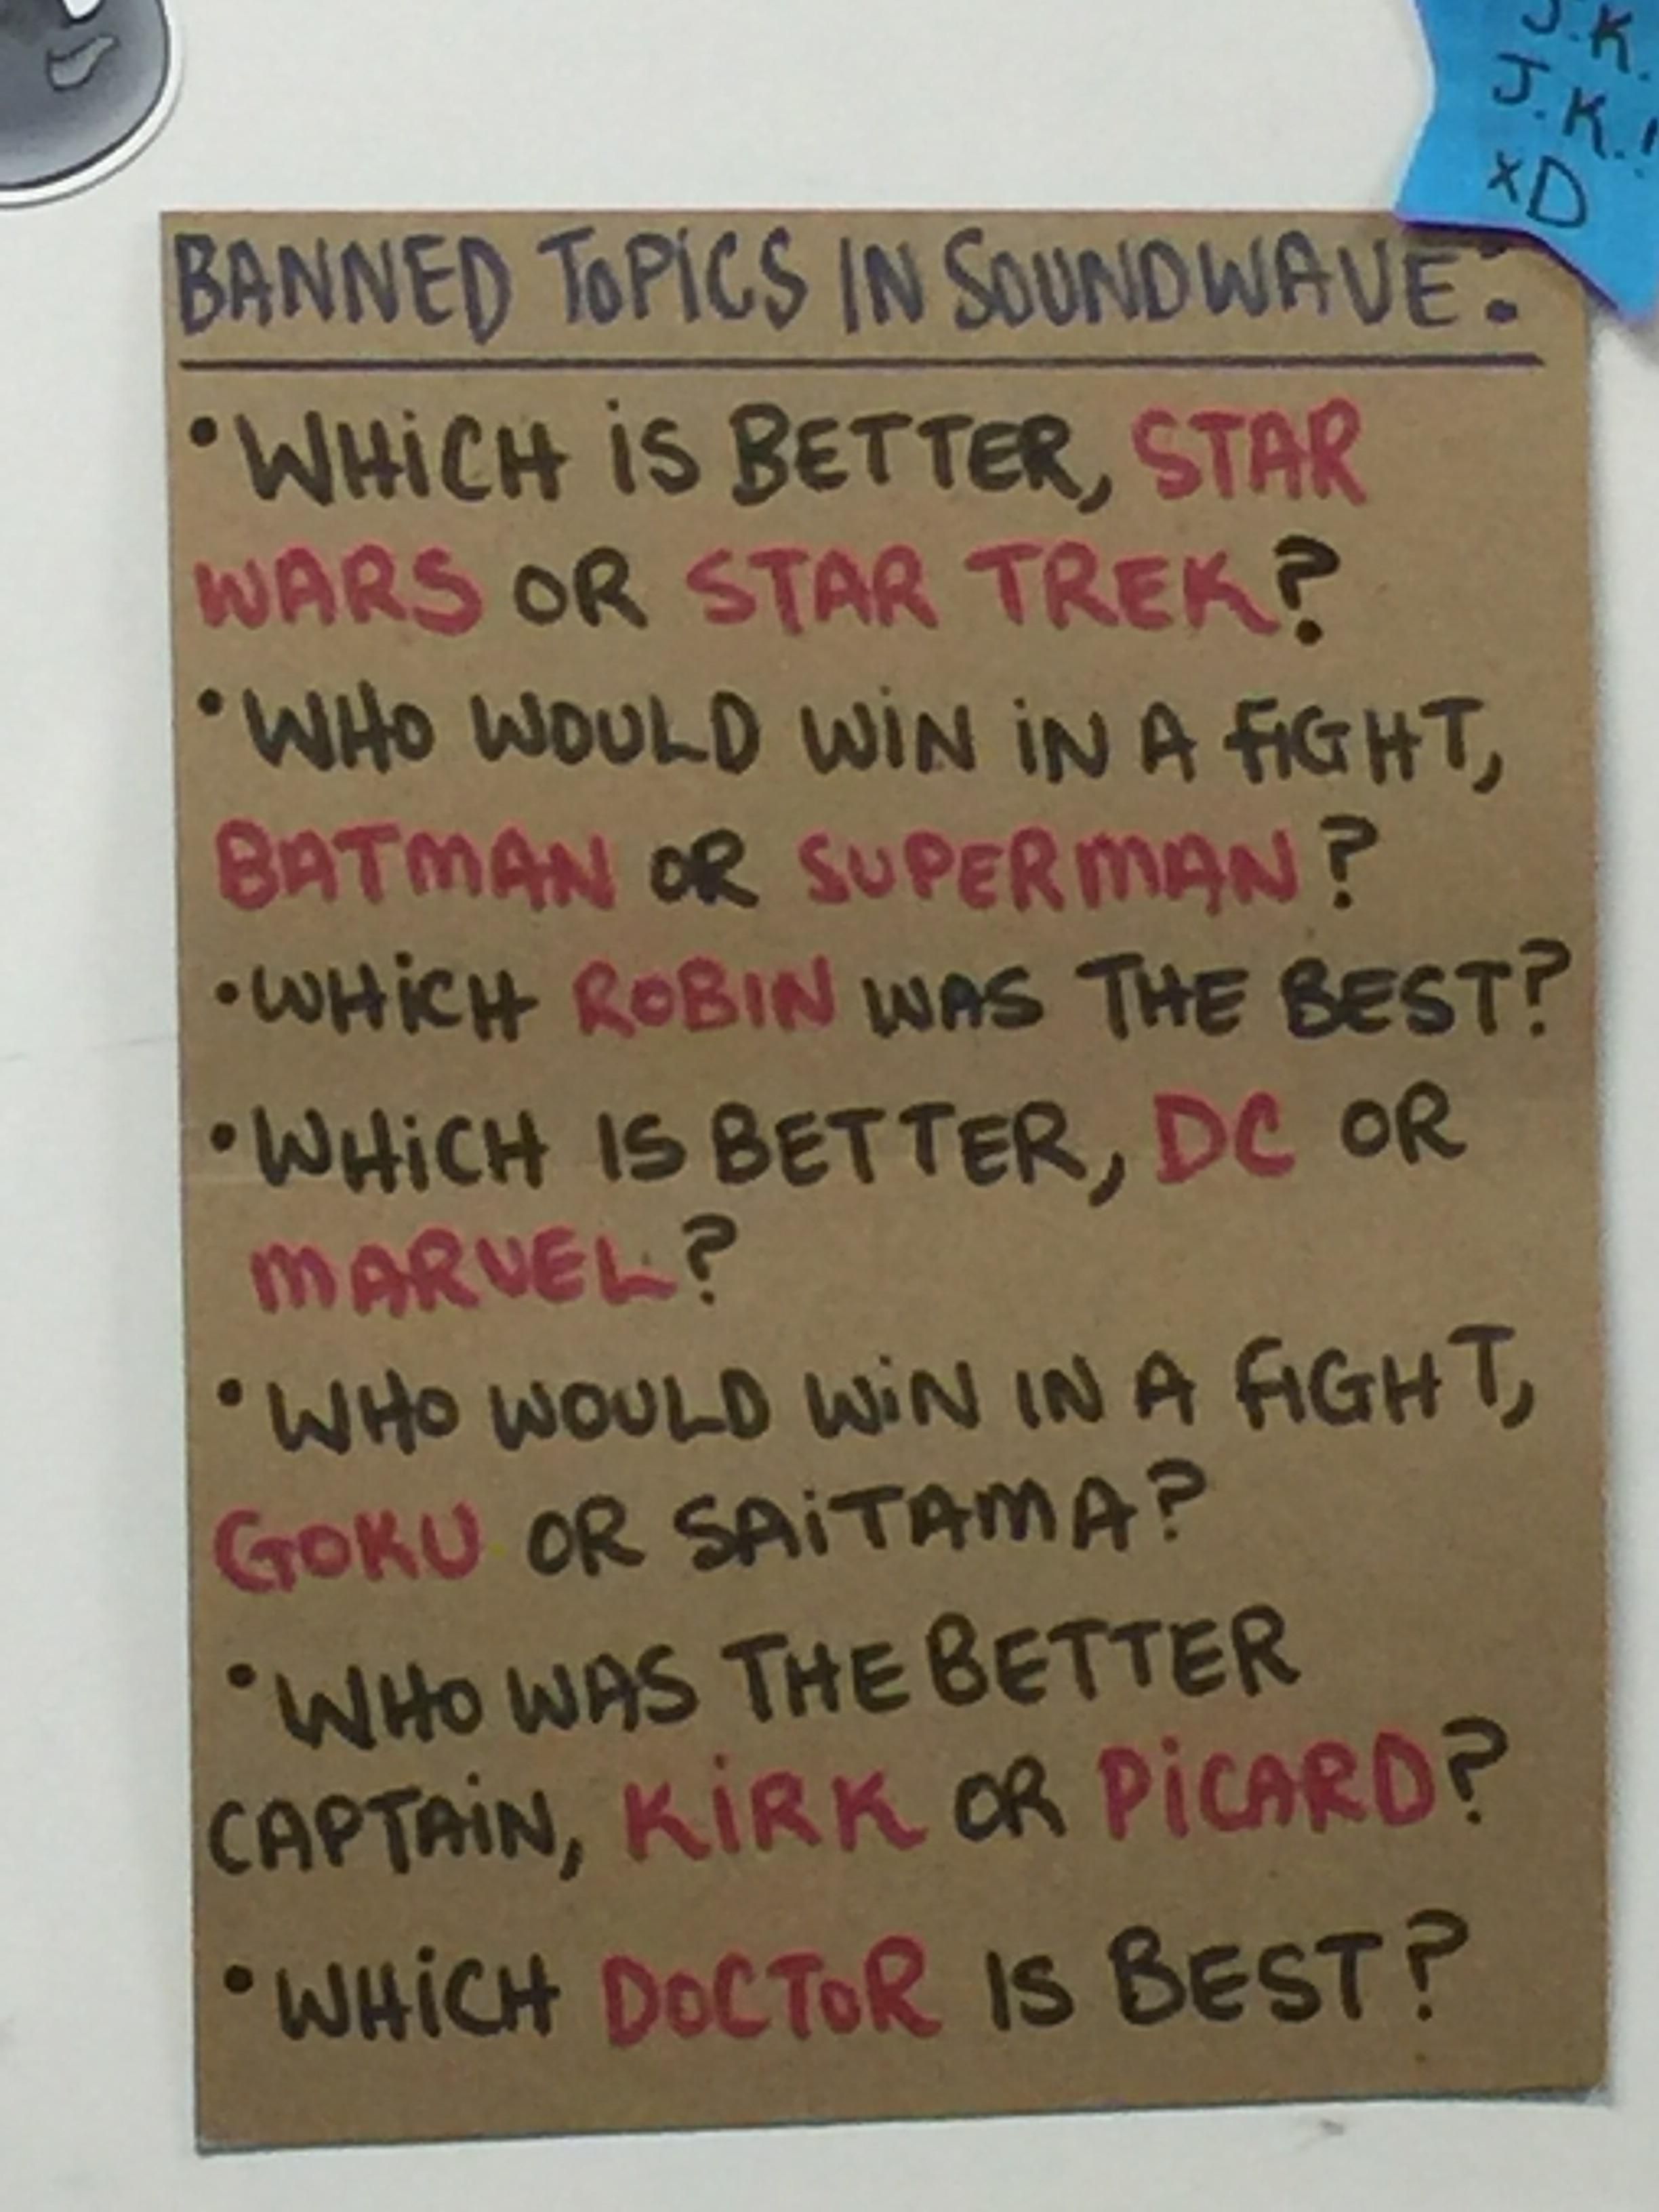 Banned topics at local comic book shop